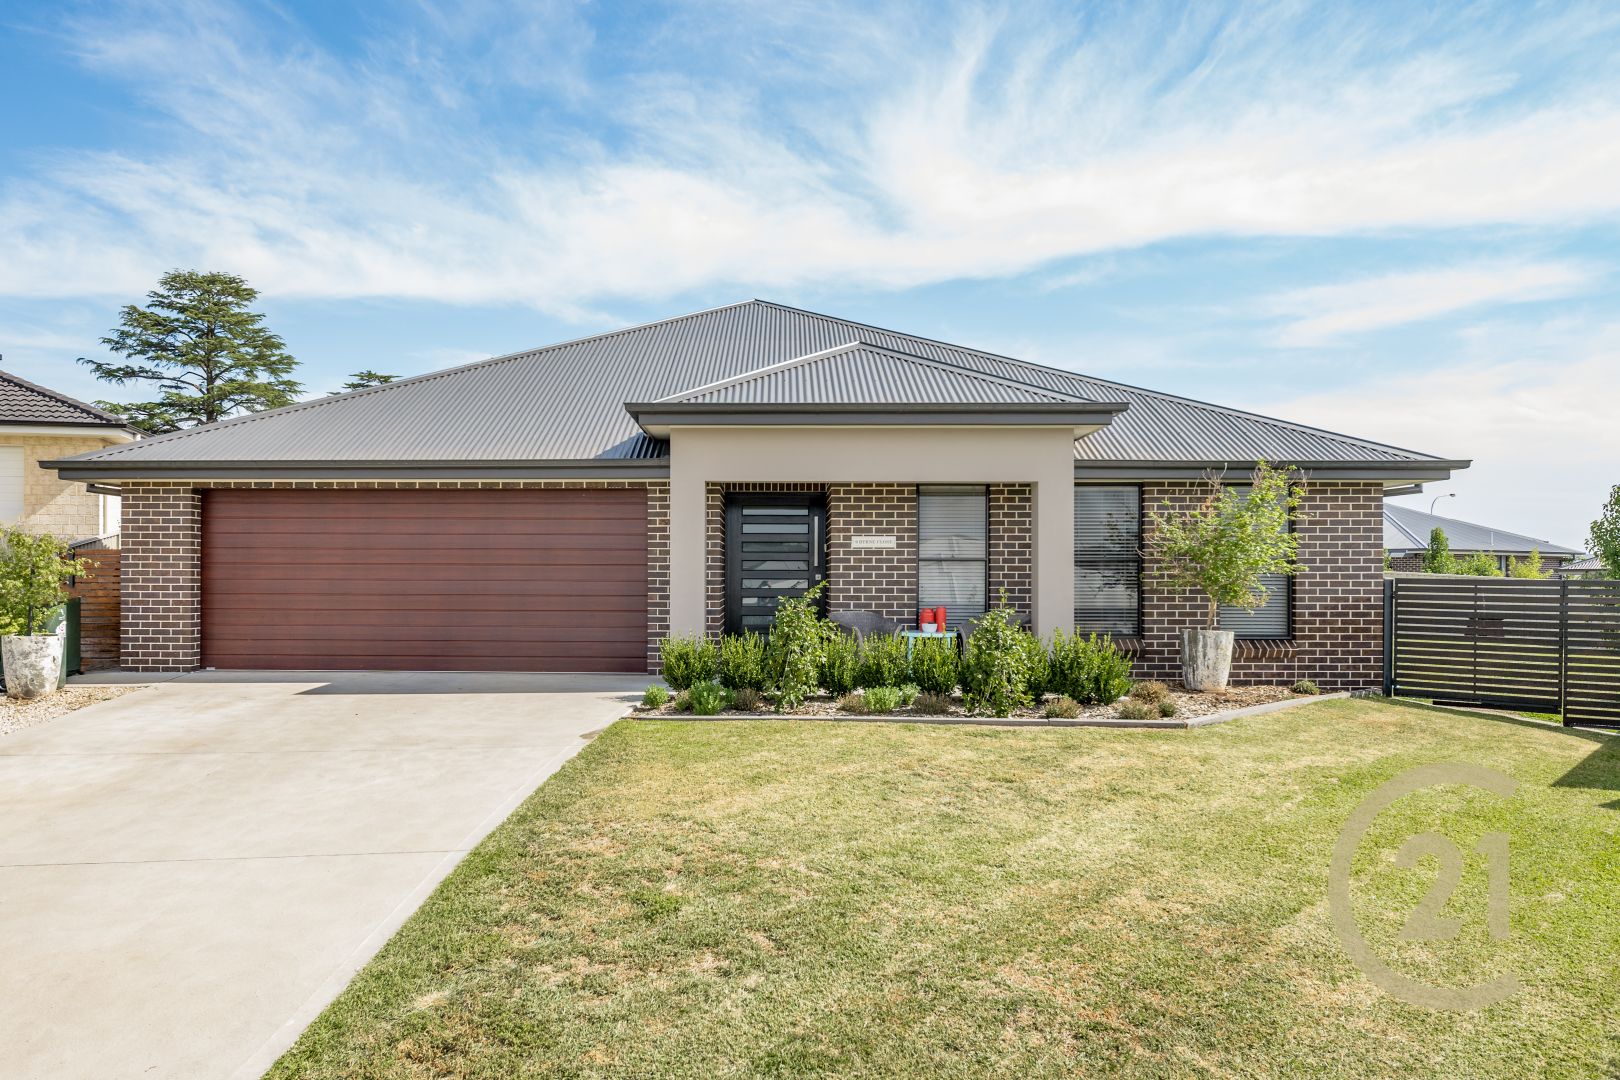 9 Byrne Close, Kelso NSW 2795